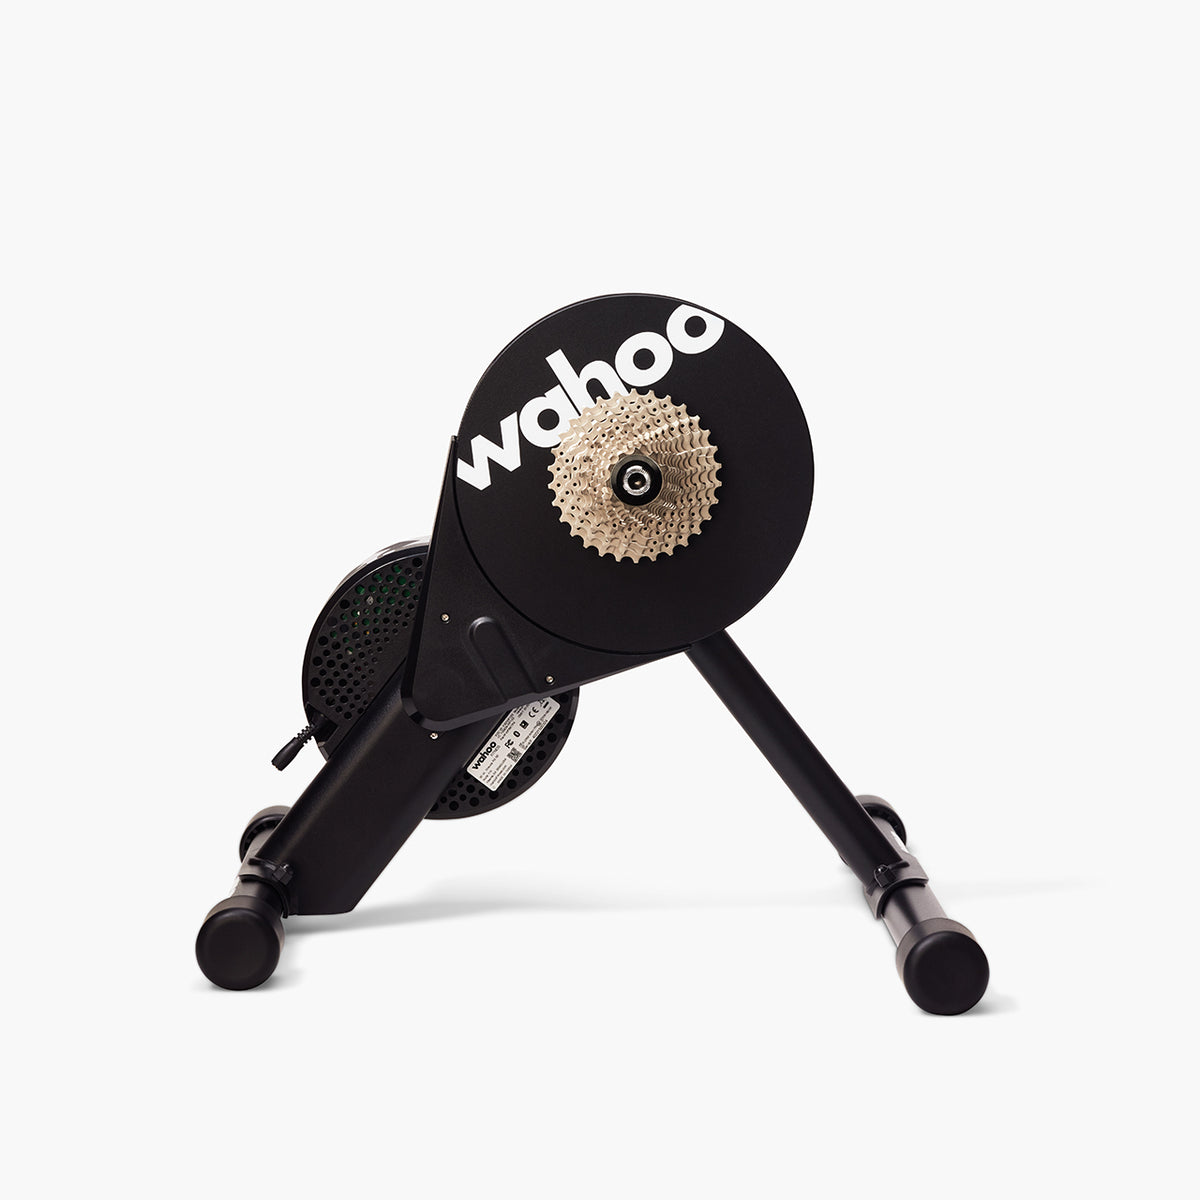 Wahoo KICKR CORE smart trainer with 12-speed cassette